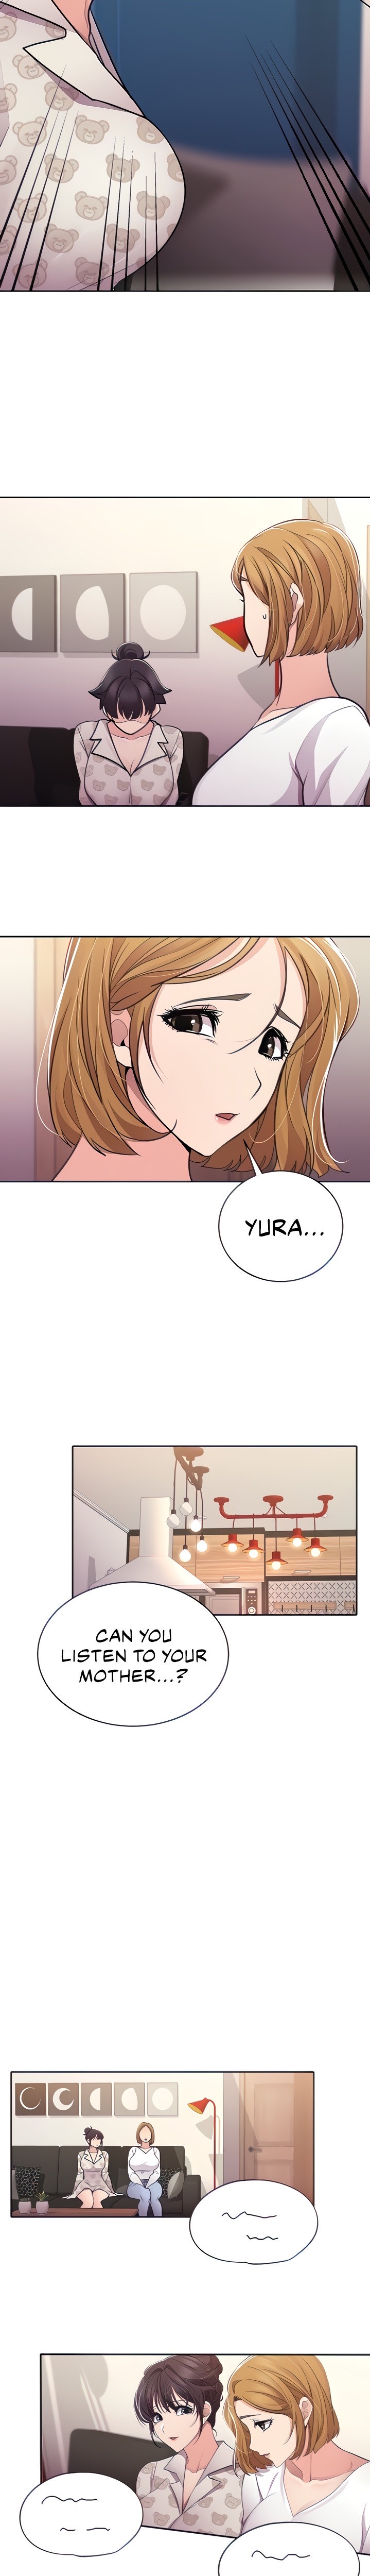 Meeting you again - Chapter 34 Page 6